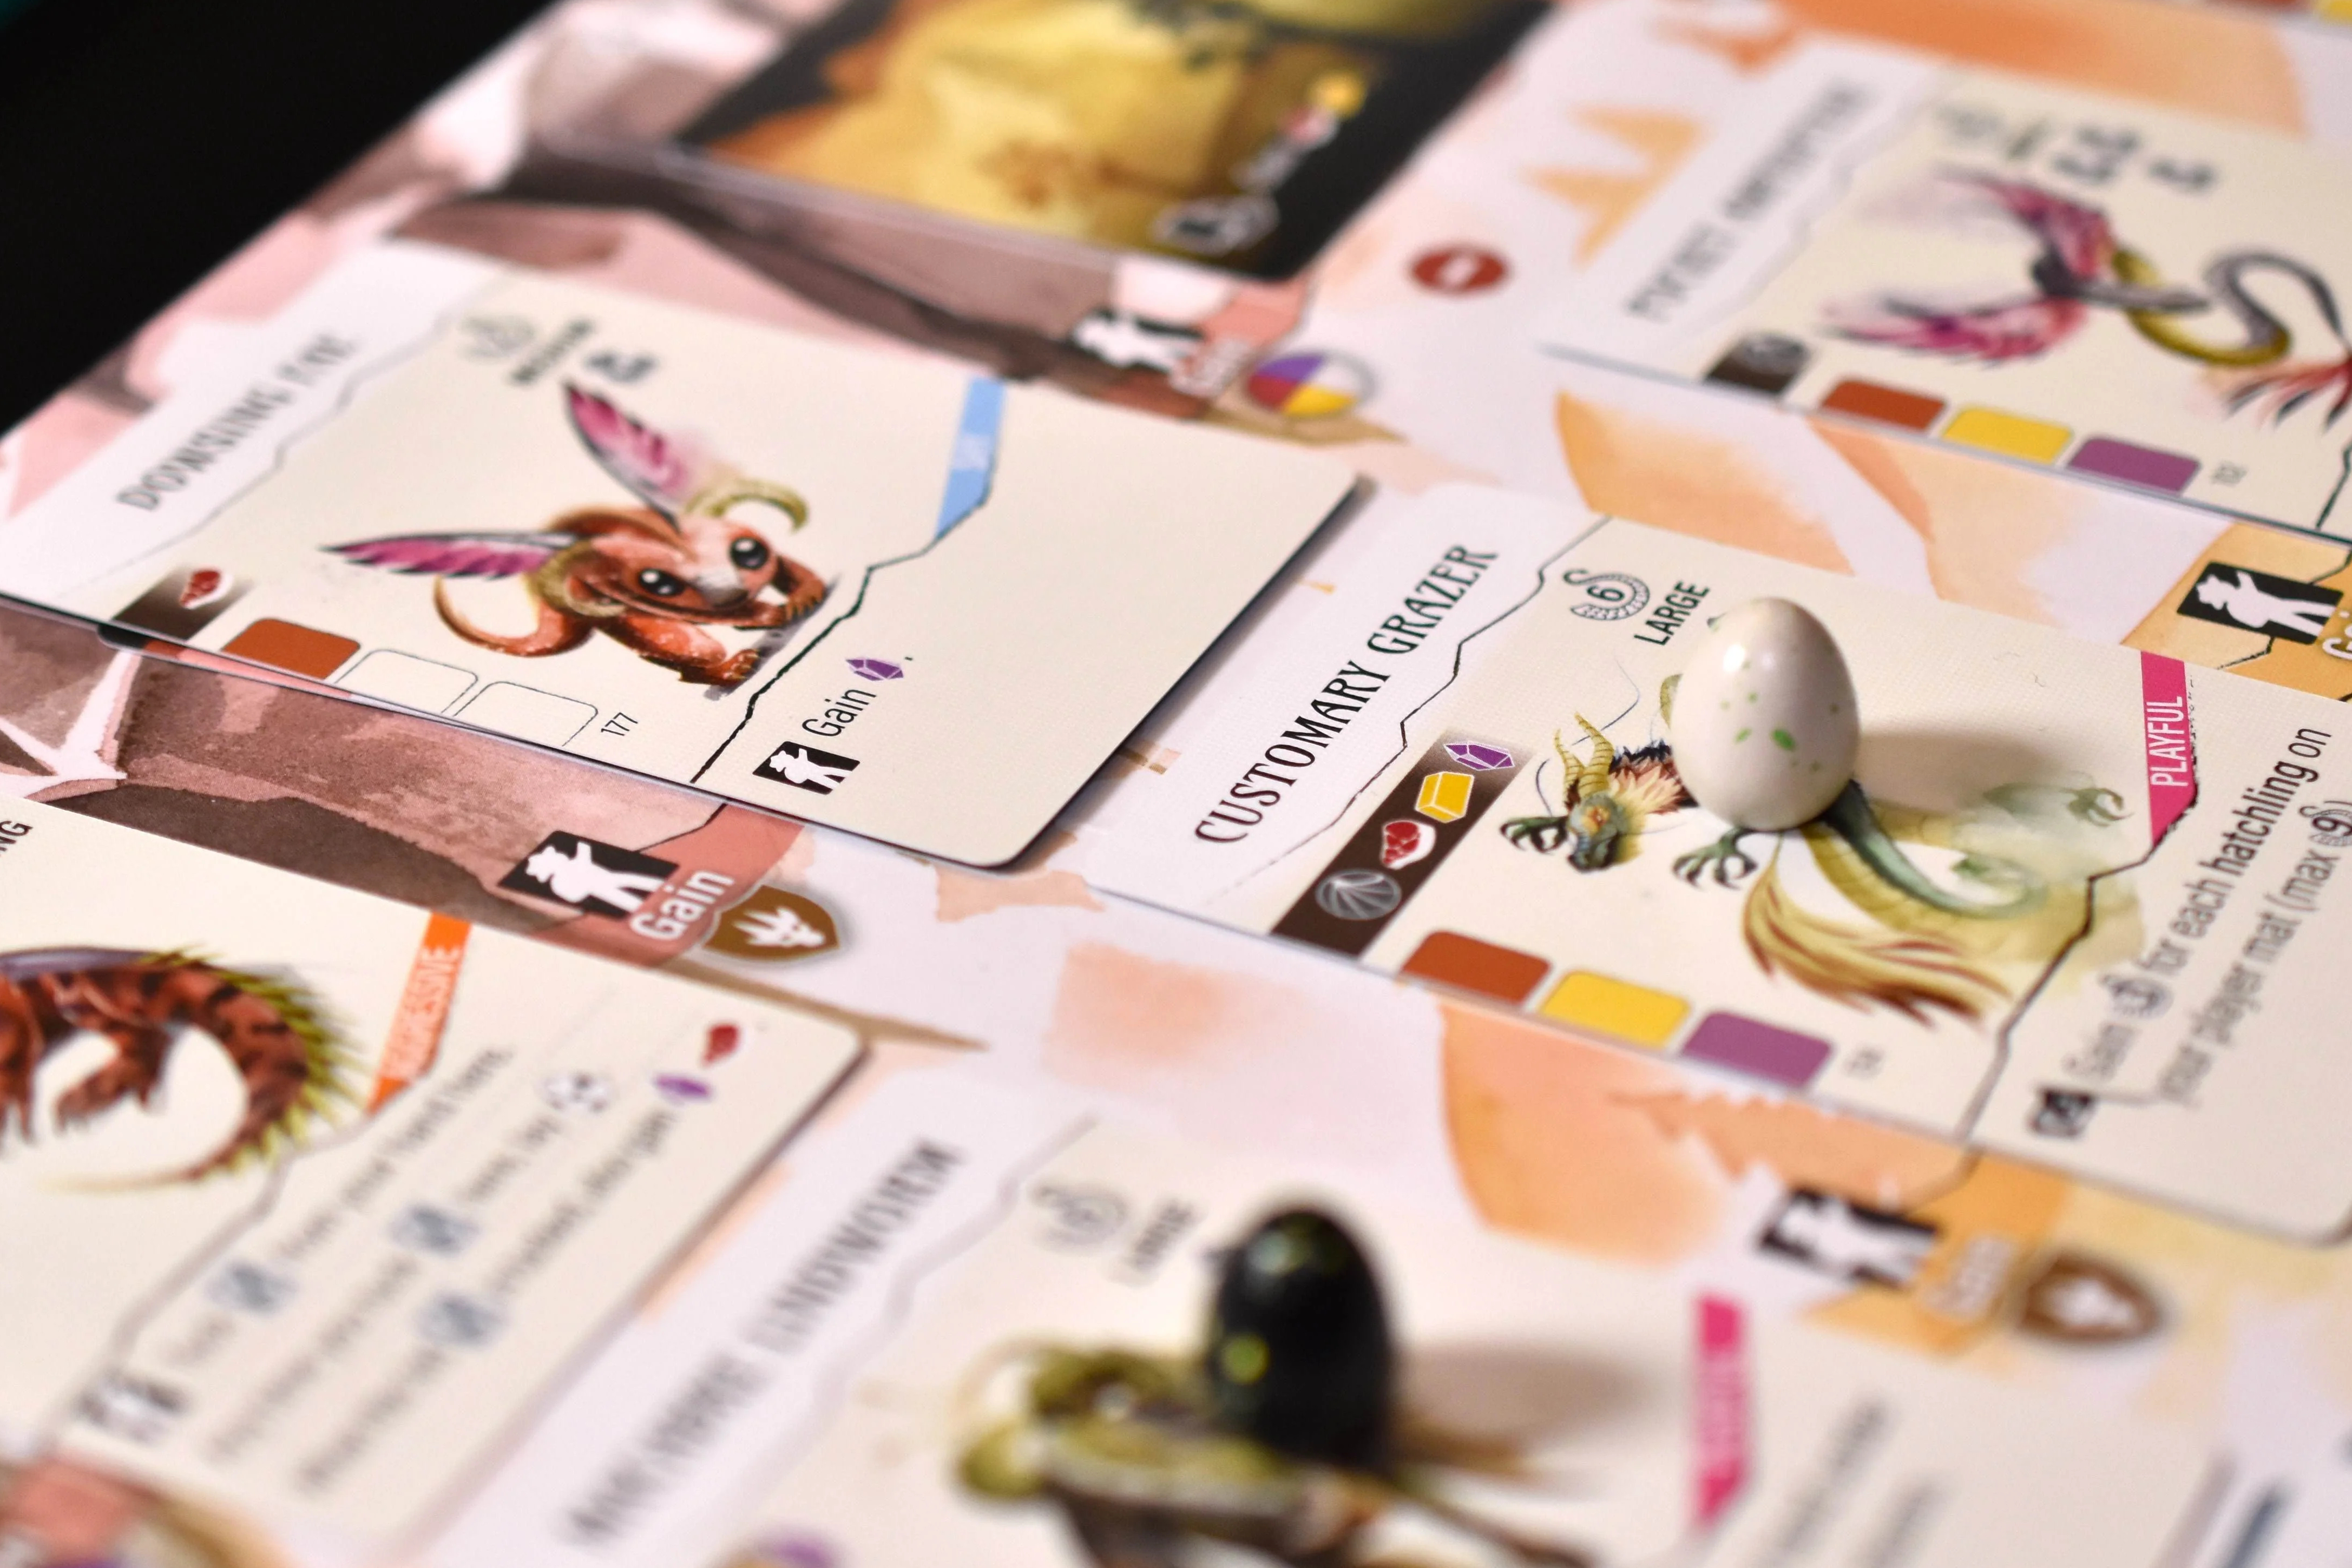 A photo taken of the board game Wyrmspan in play. It shows multiple cards arranged side by side, with game items, like an egg, sitting on top of one.